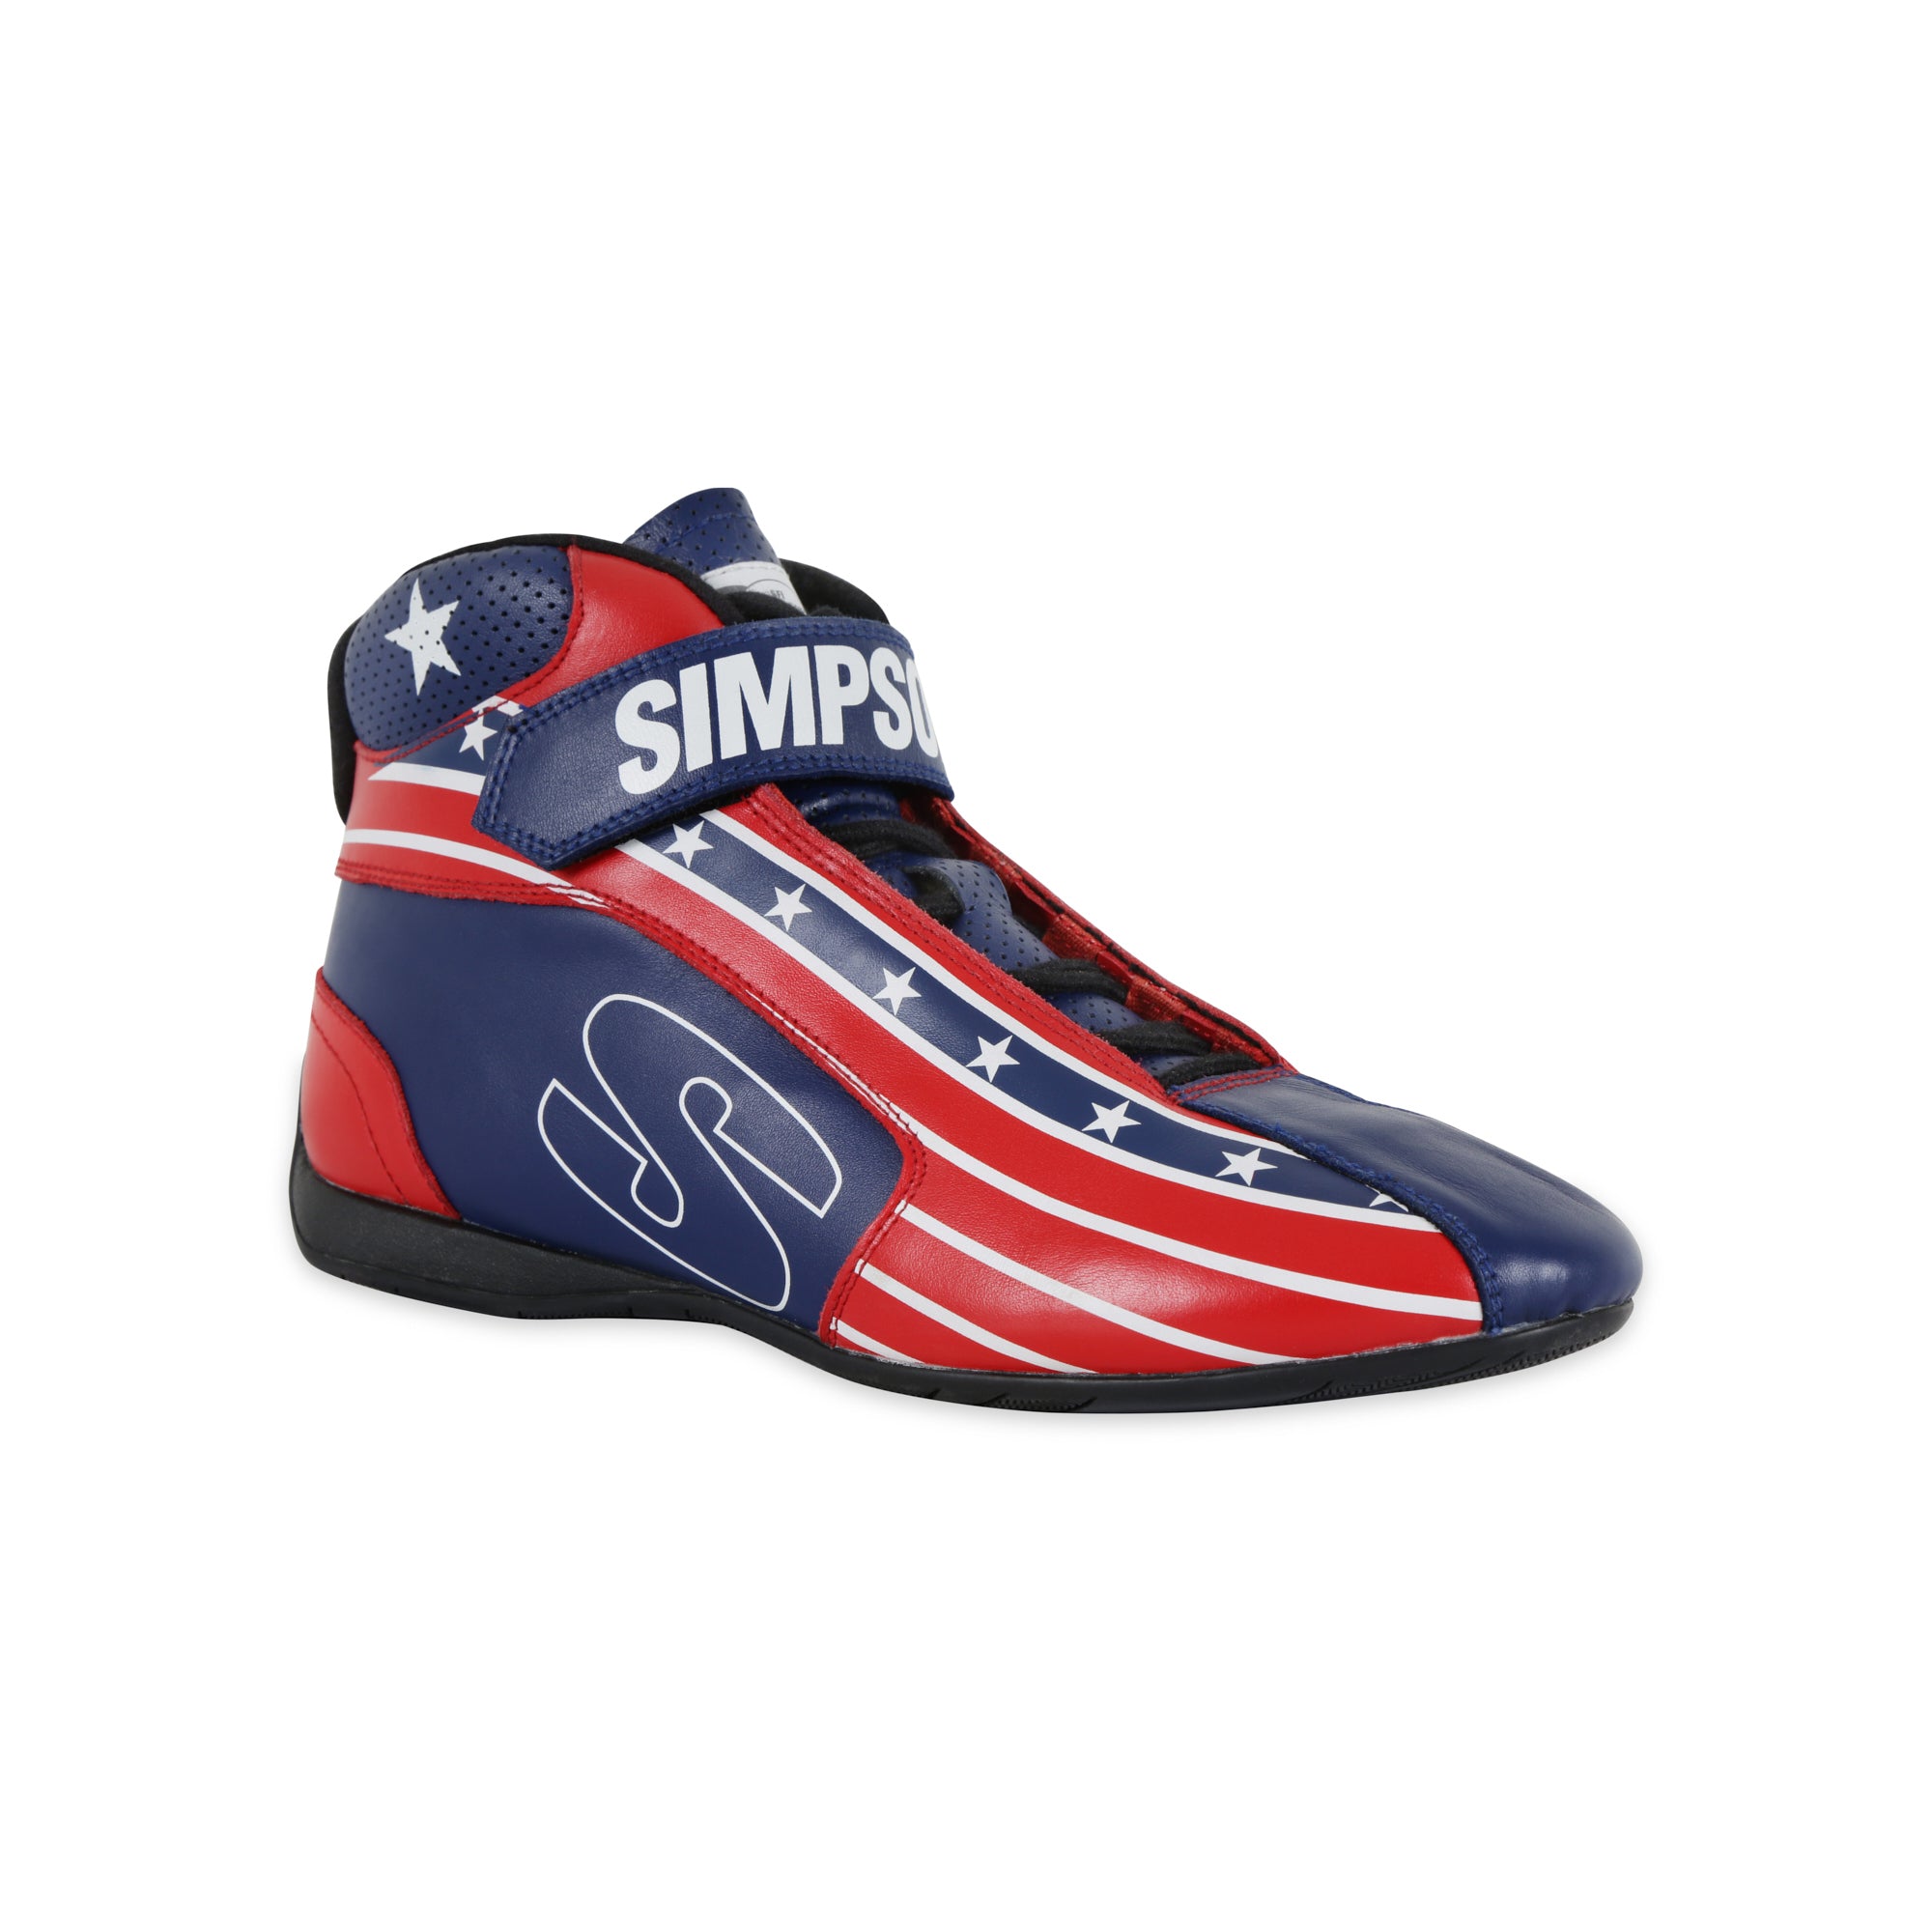 Simpson Shoe DNA X2 Patriot Size 8.5 Safety Clothing Driving Shoes and Boots main image